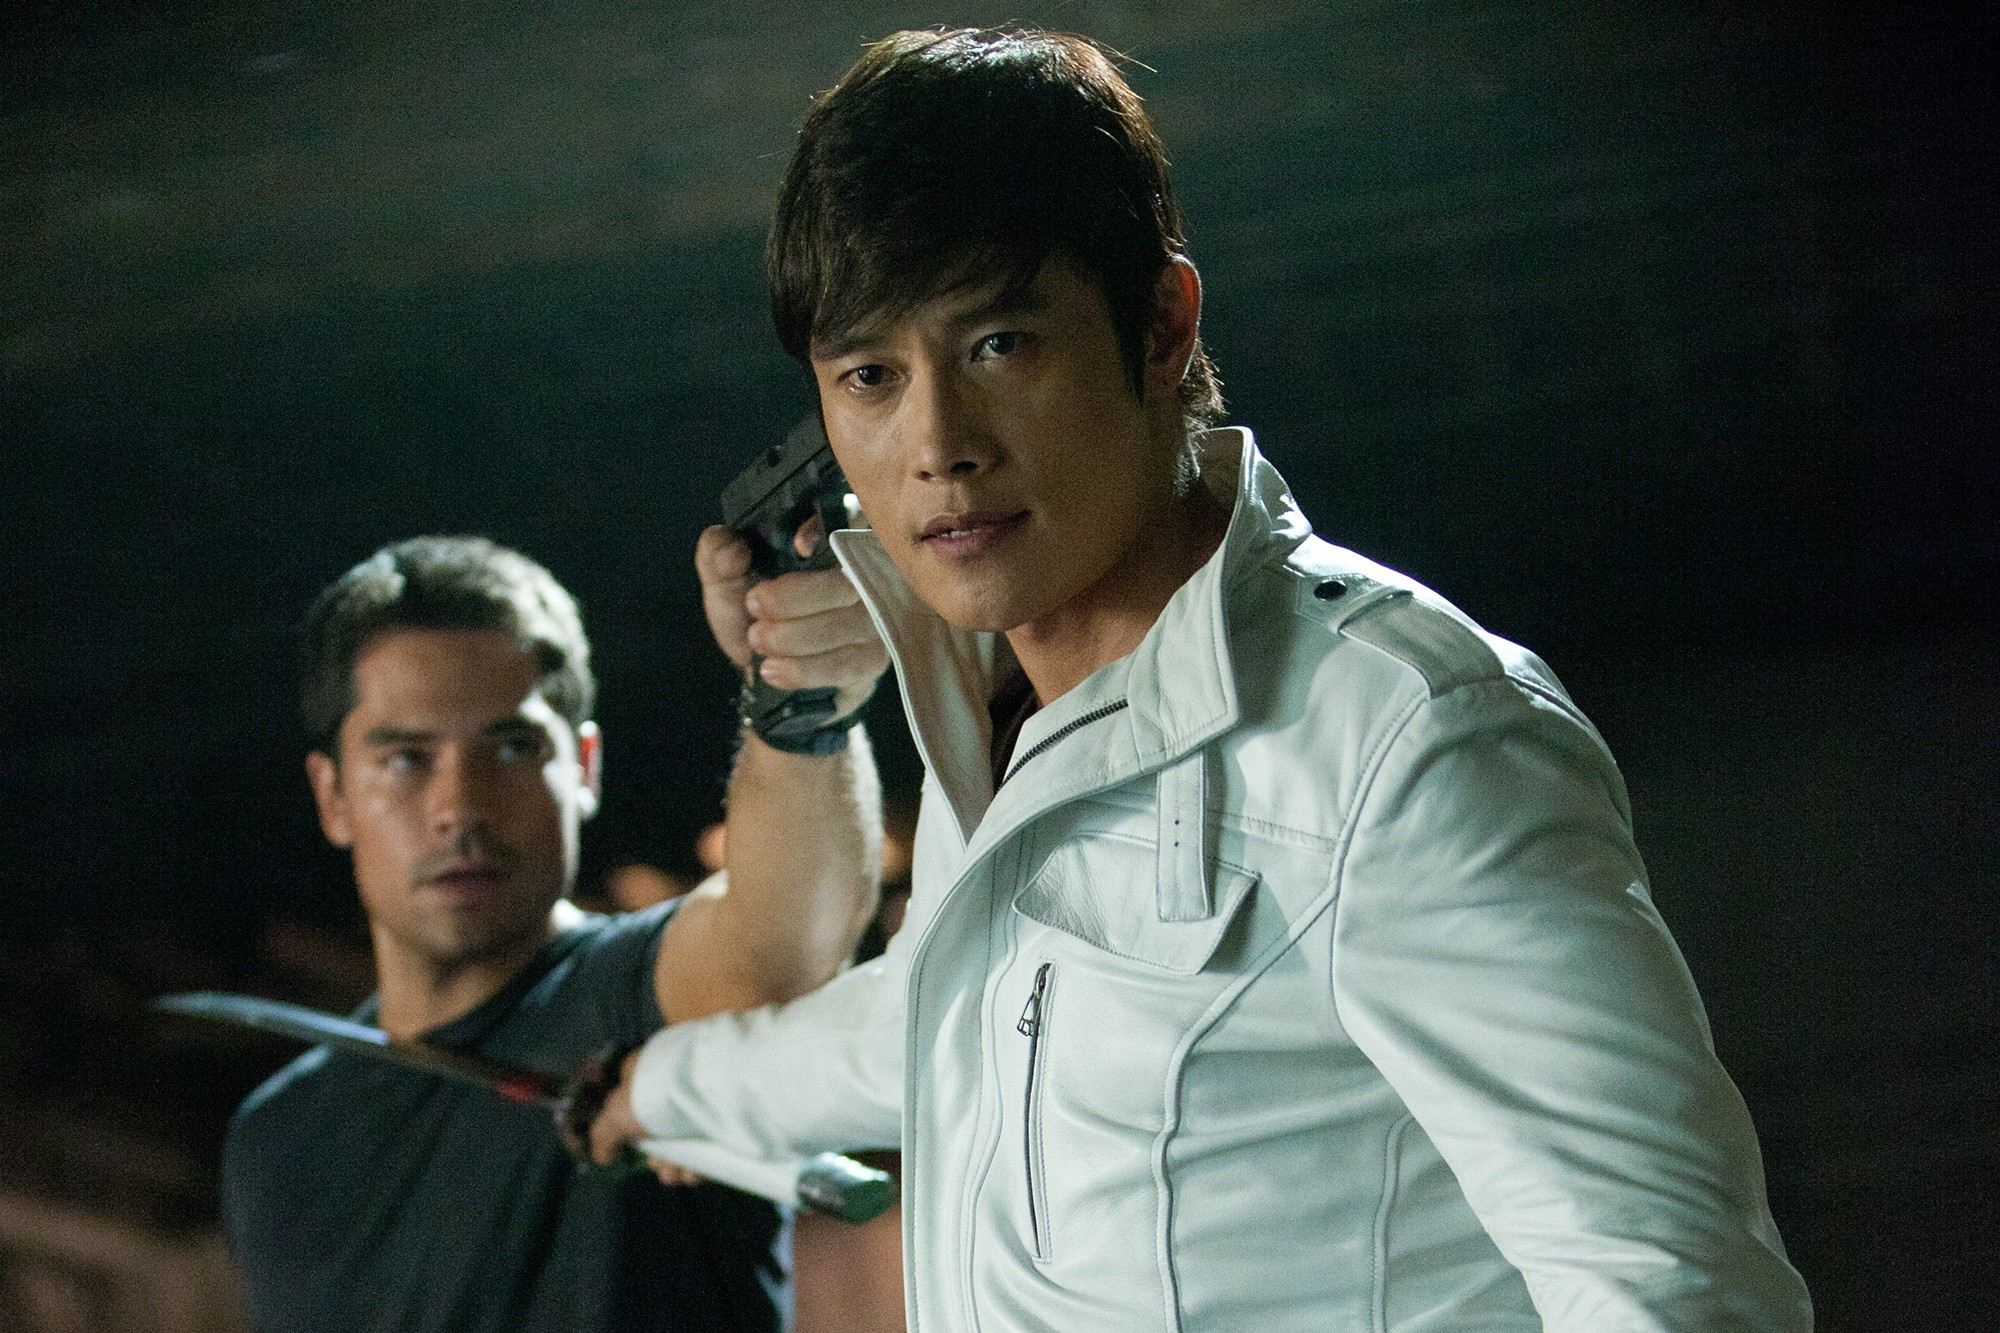 D.J. Cotrona stars as Flint and Lee Byung Hun stars as Storm Shadow in Paramount Pictures' G.I. Joe: Retaliation (2013)